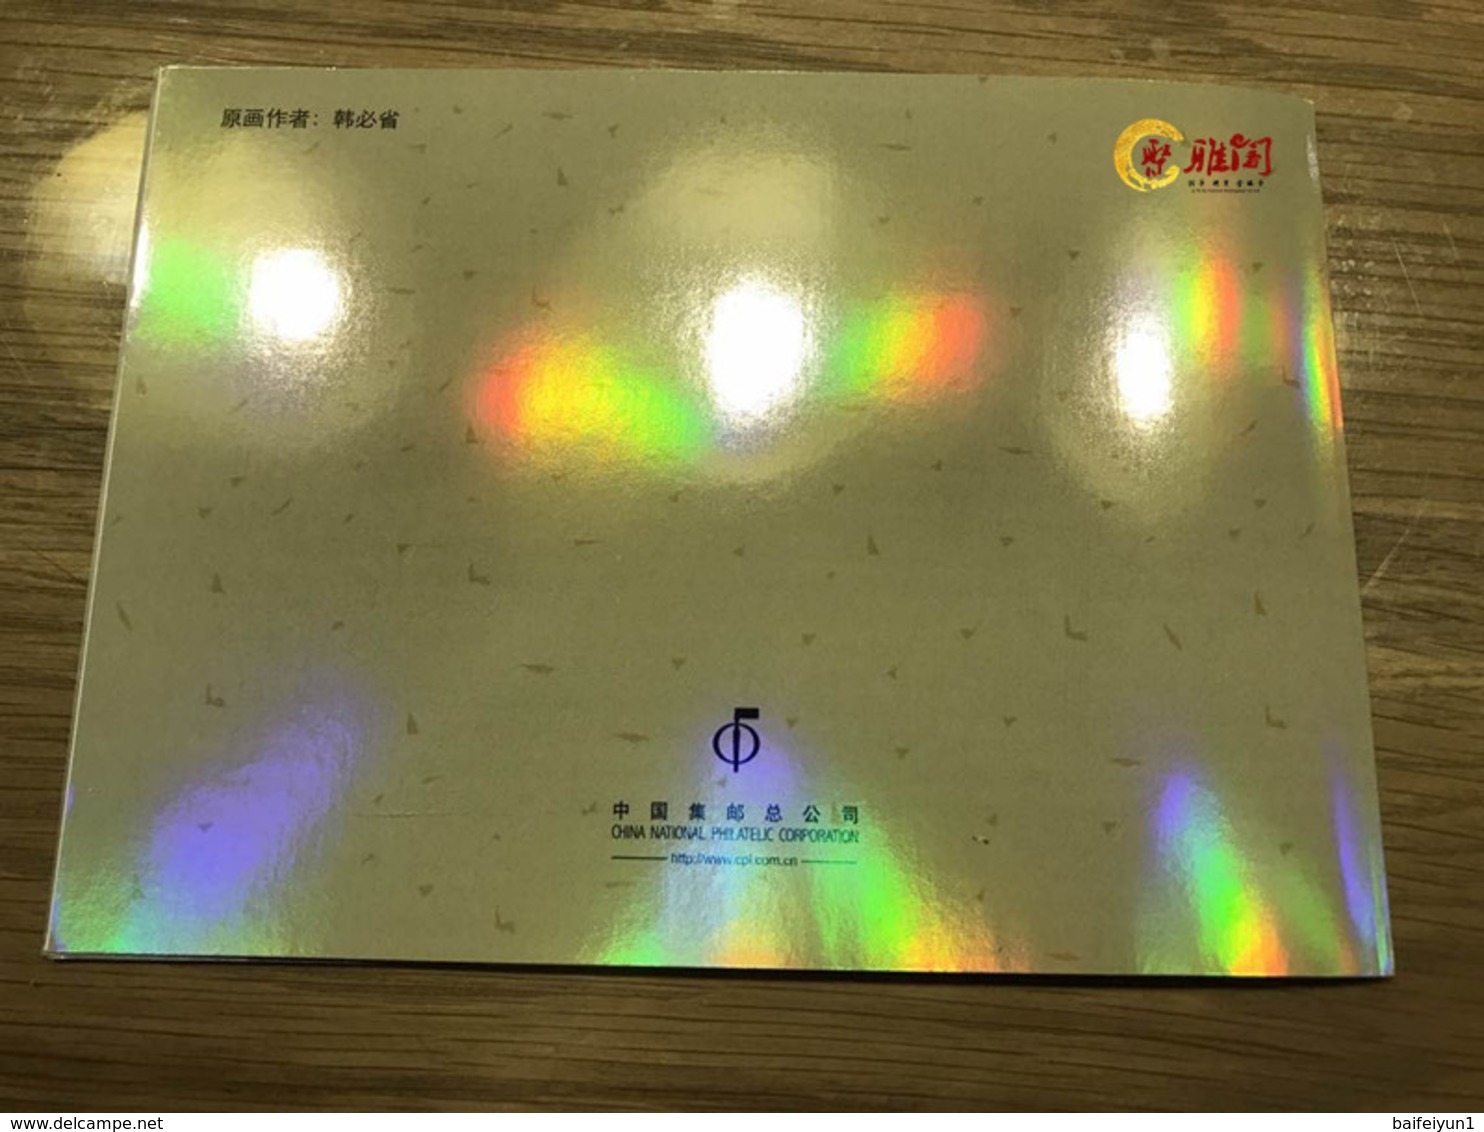 China 2016-1 Intelligent Monkey Celebrating The New Year Special S/S Booklet(Cover Is Holographic) - Ologrammi